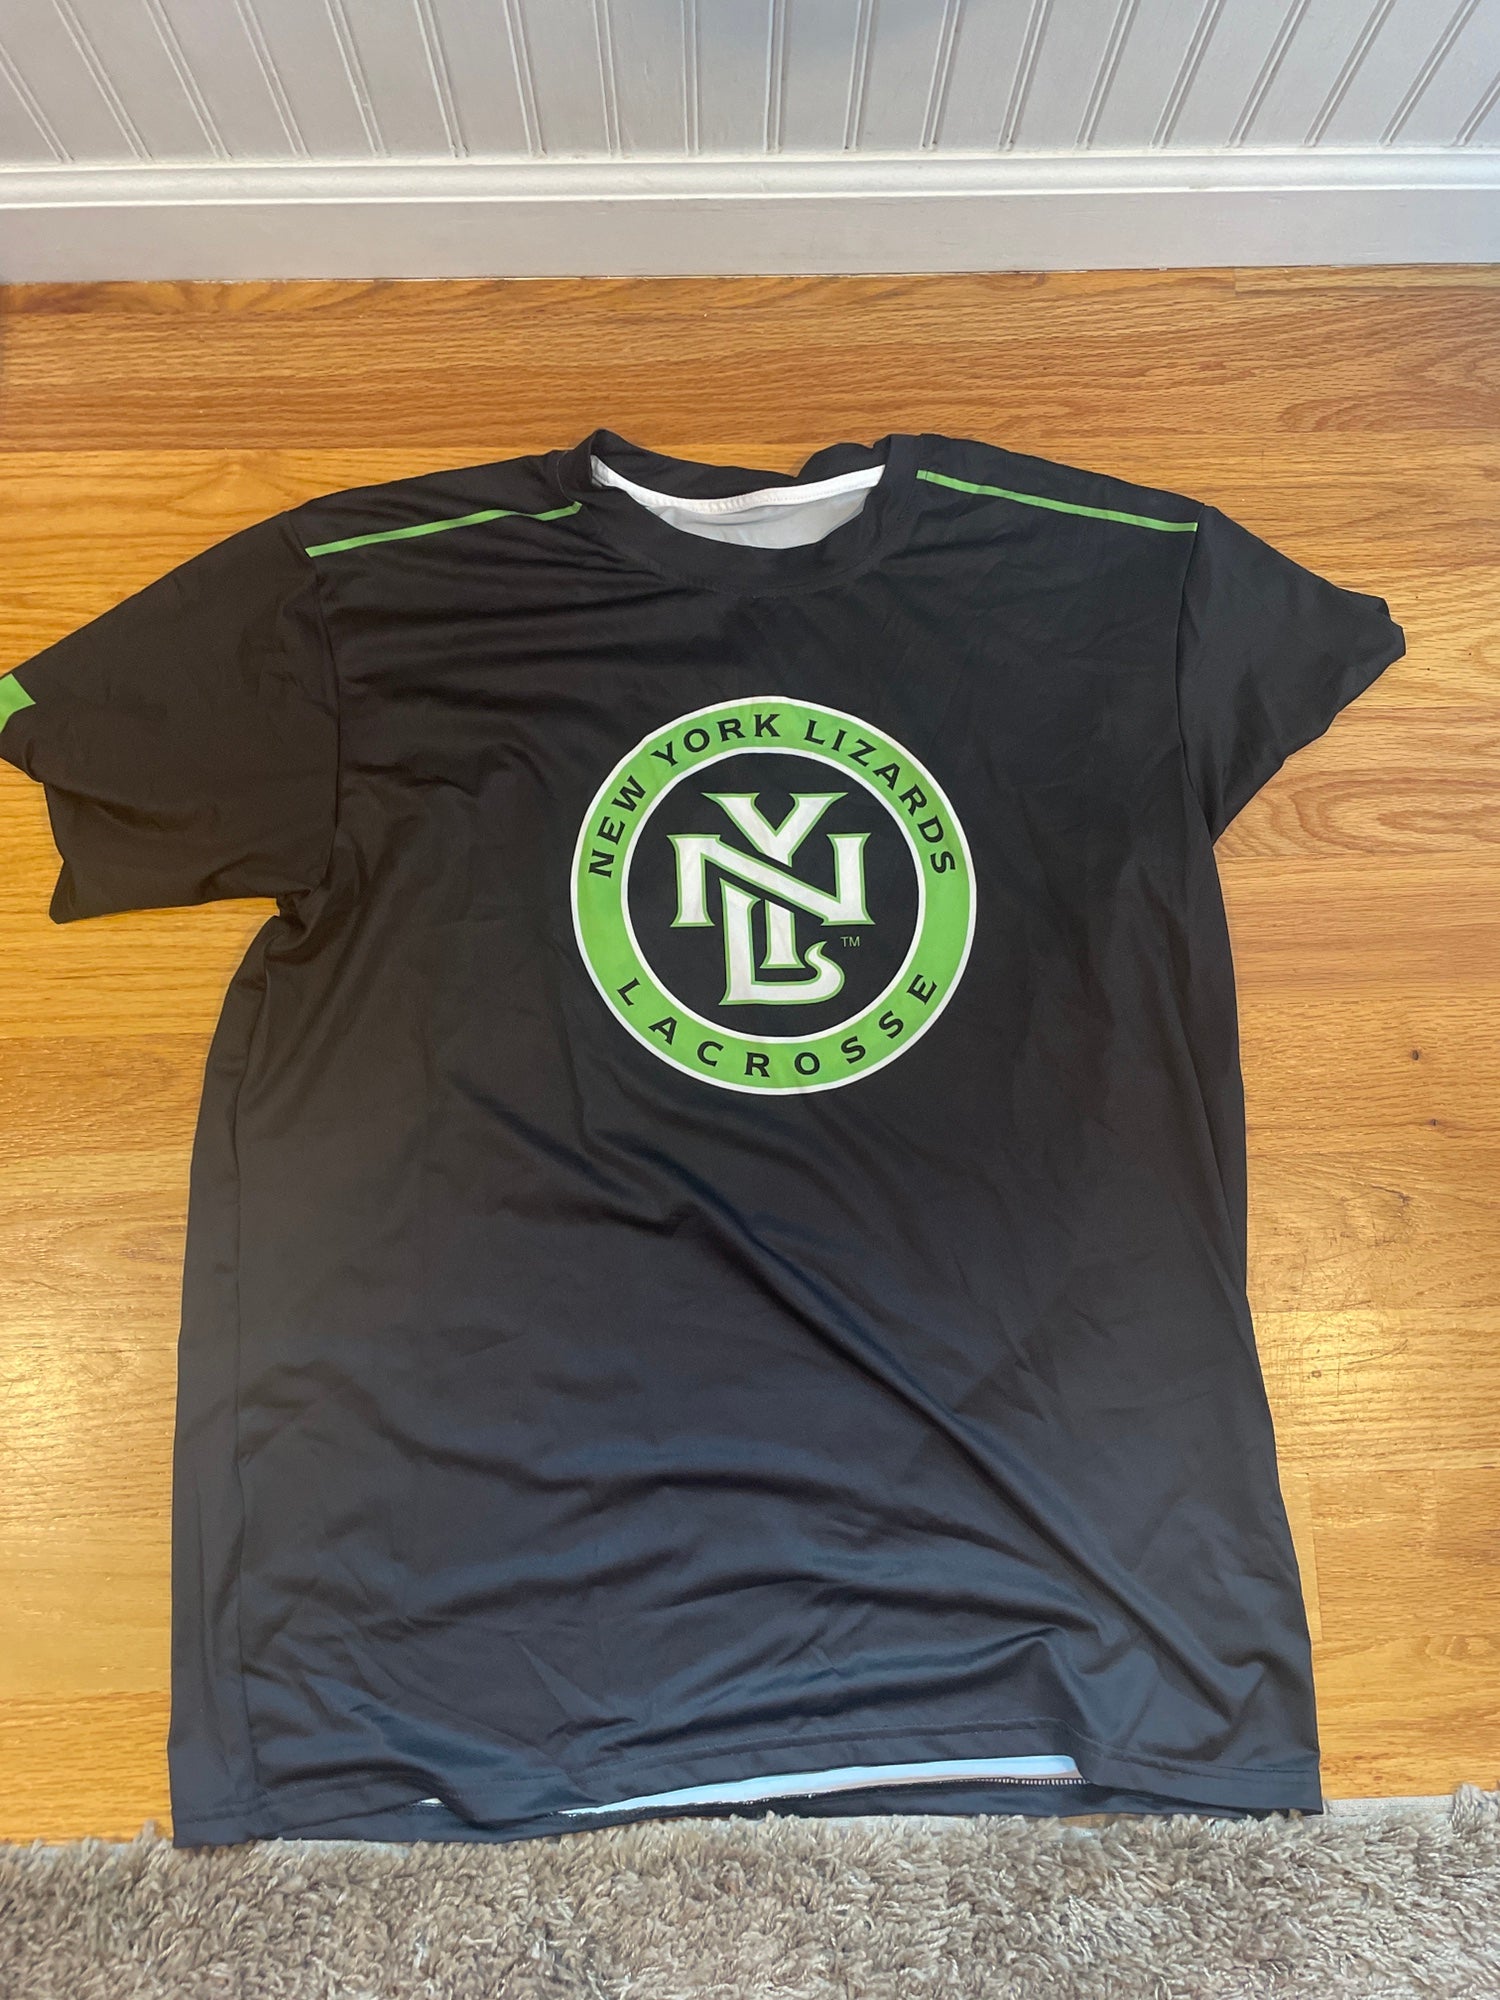 Powell Lacrosse - New York lizards Shooter Shirt -Black New Large Jersey